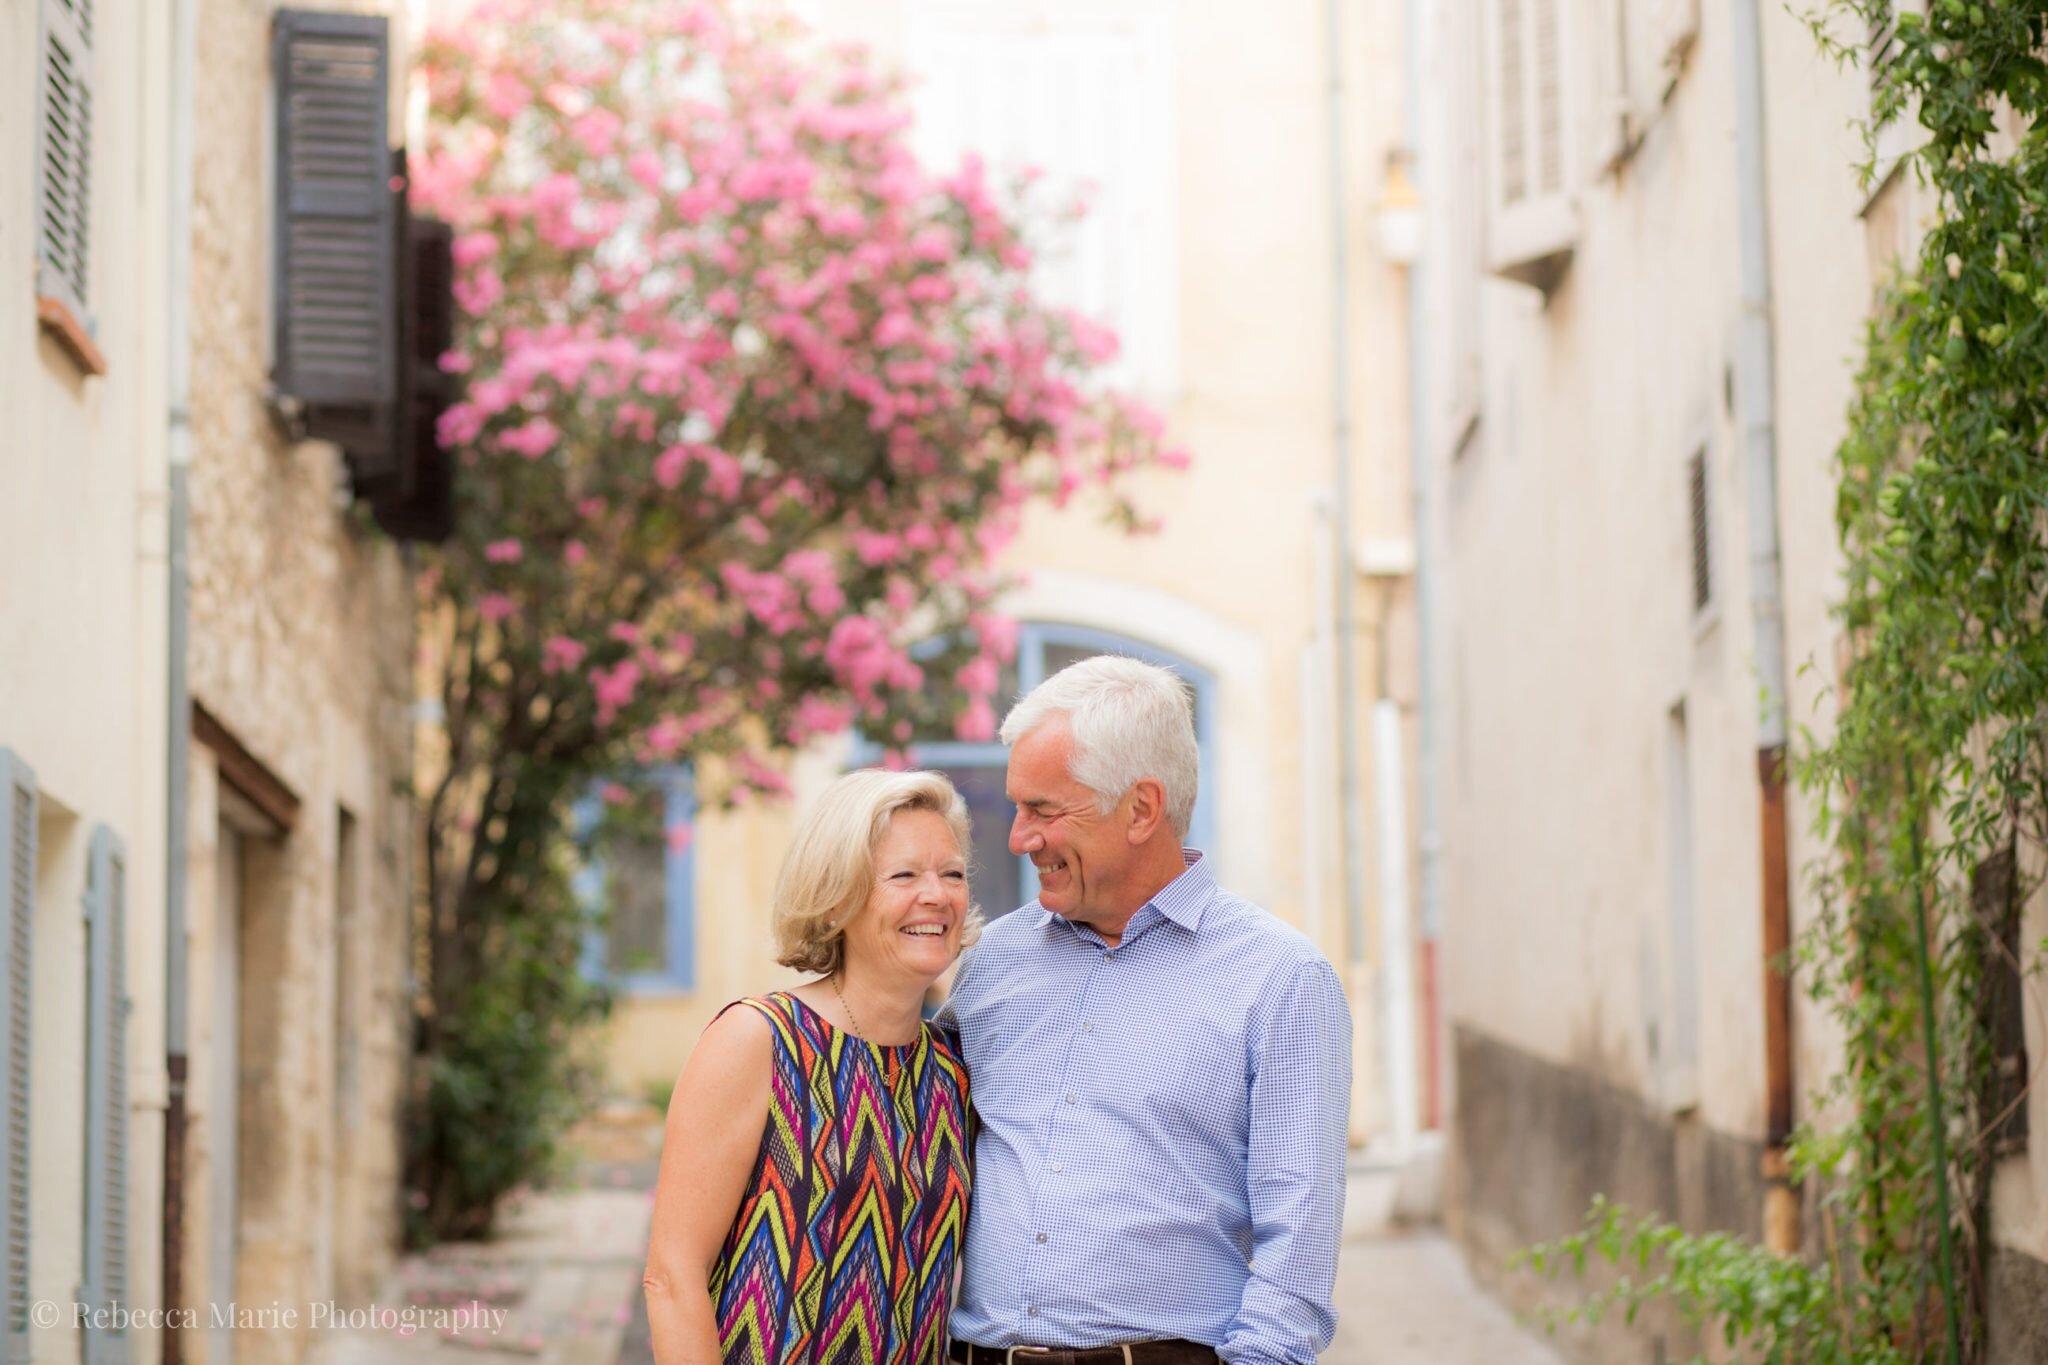 Portraits-in-France-Valbonne-Rebecca-Marie-Photography-2-1